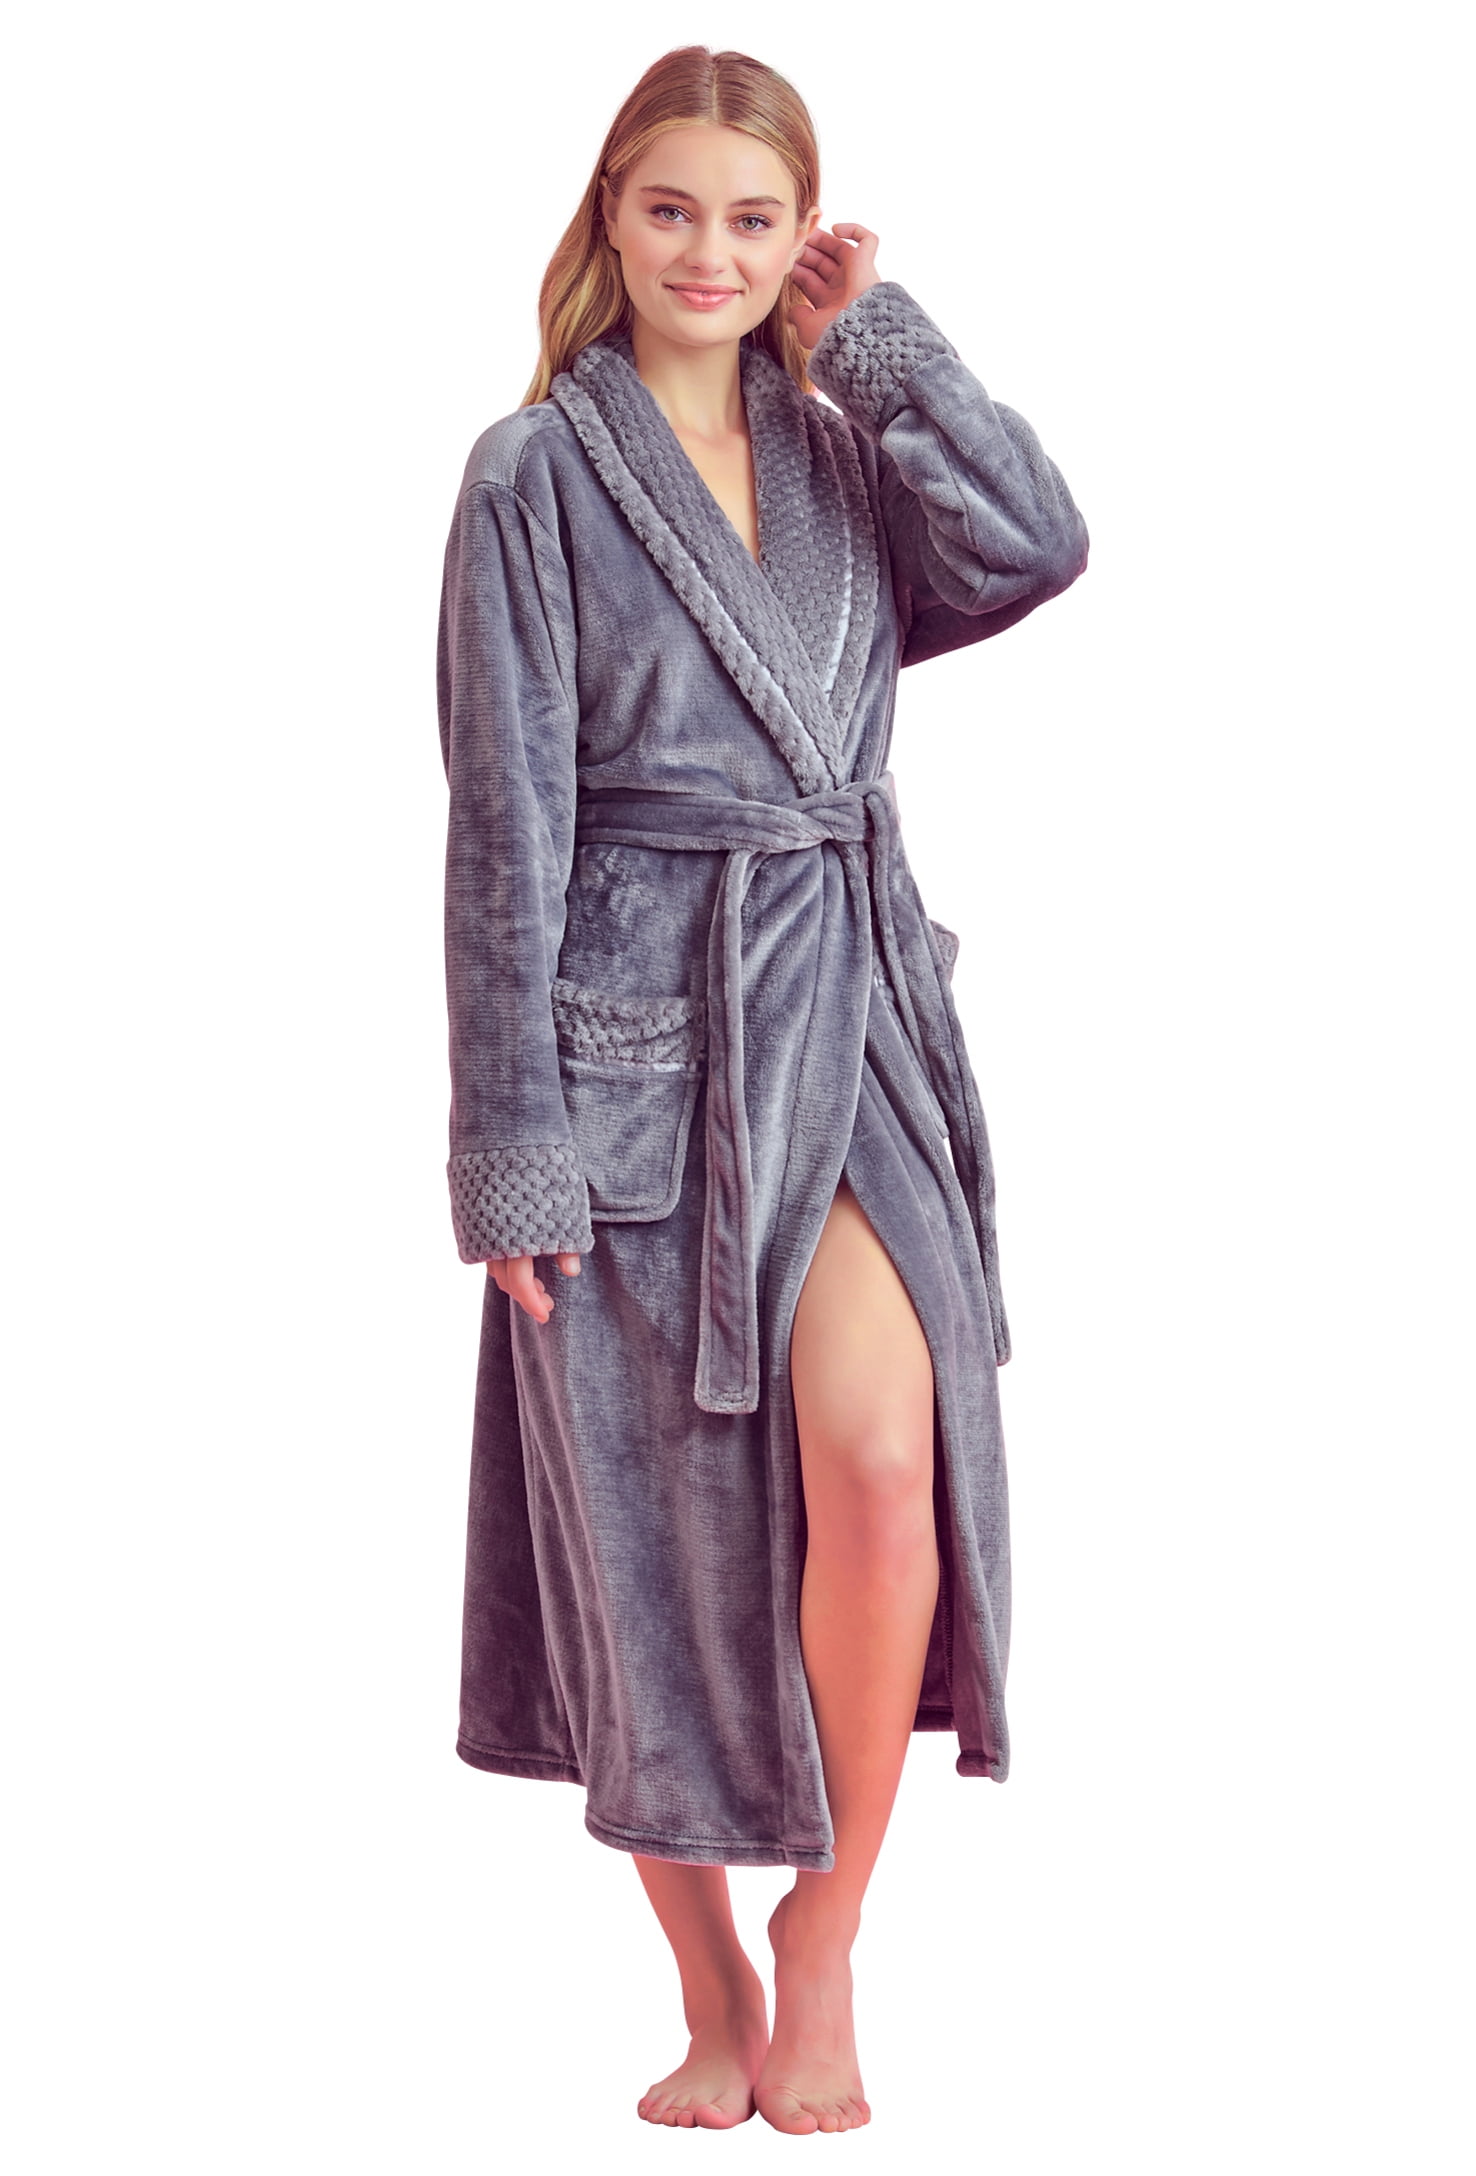 RONGTAI Womens Long Robes Plush Fleece Nightgown Thick Plus Size Hooded Bathrobe with Pockets Fluffy Sleepwear for Men 